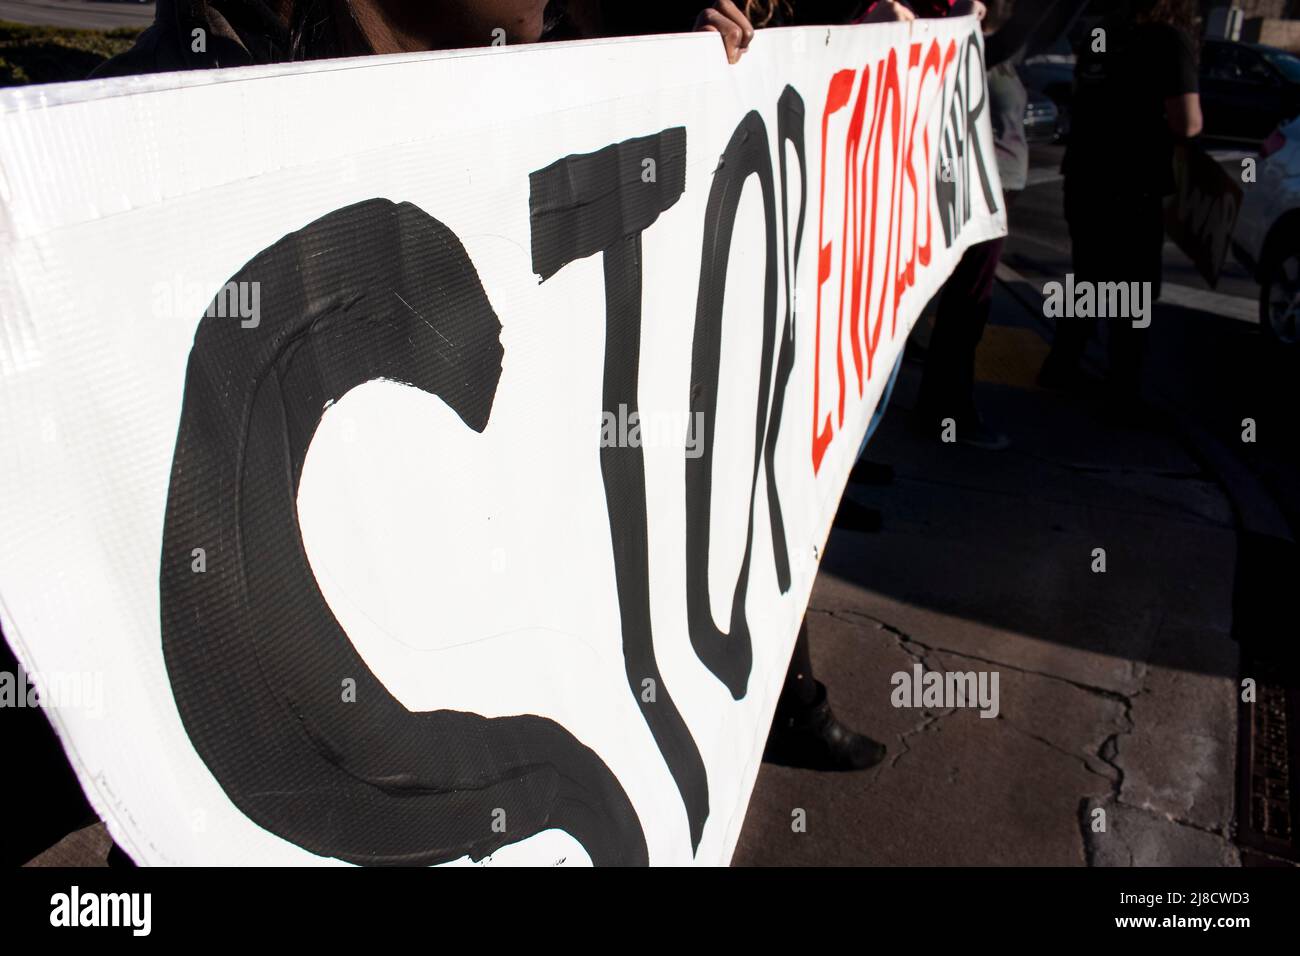 People hold up sign that reads STOP ENDLESS WAR at anti-Iran War protest - Perspective and selective focus Stock Photo